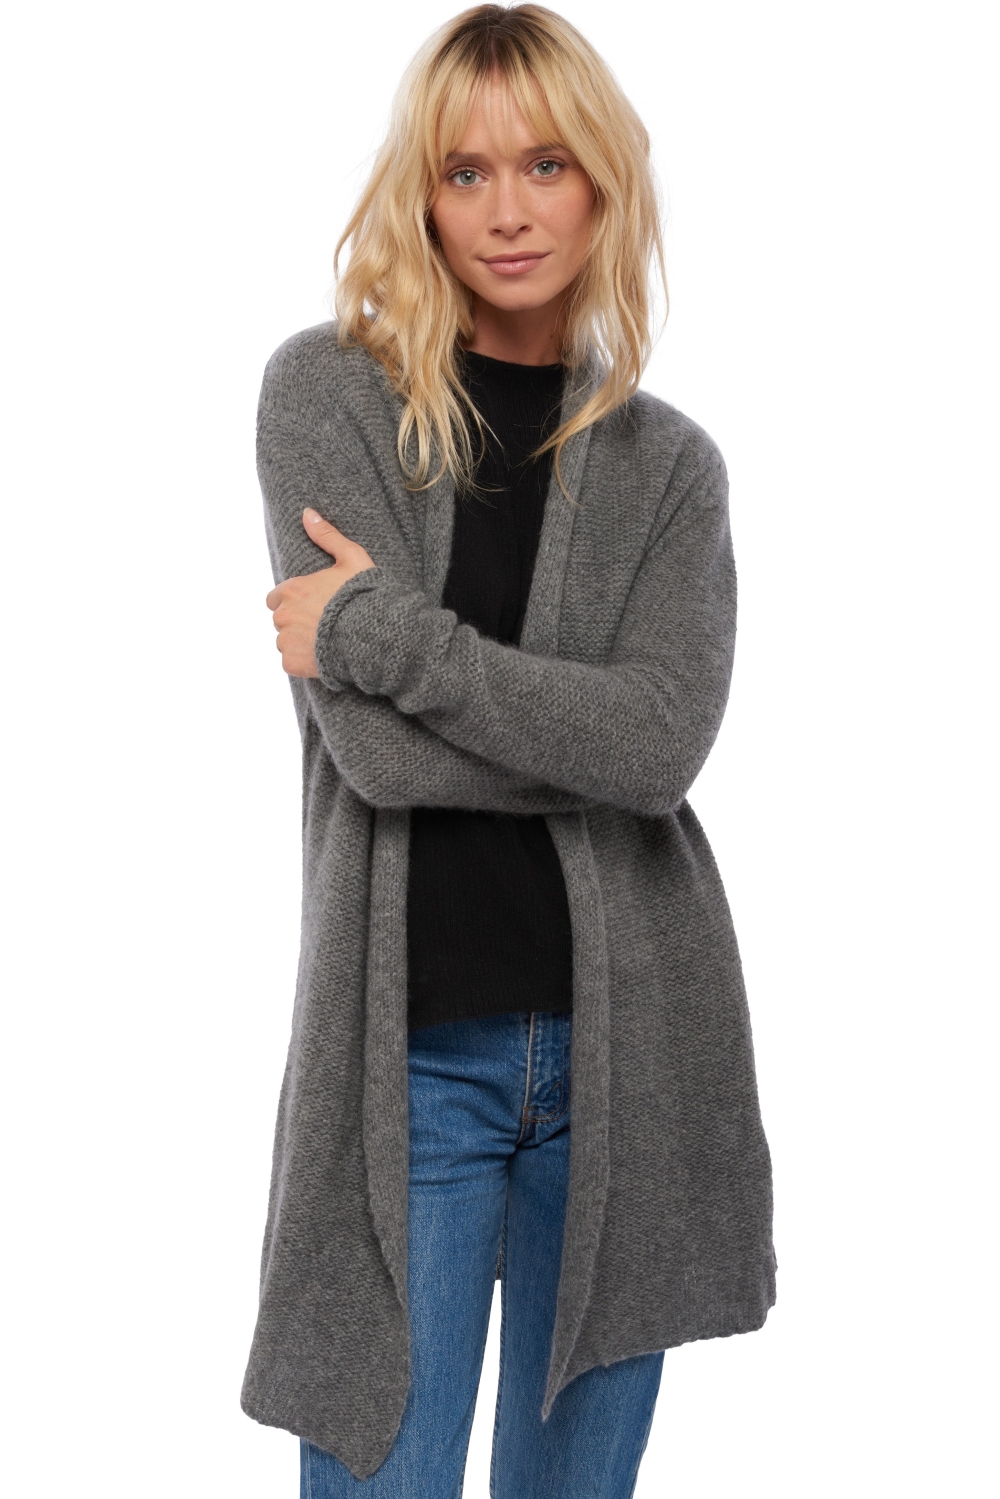 Cashmere ladies cardigans weasel thunder s